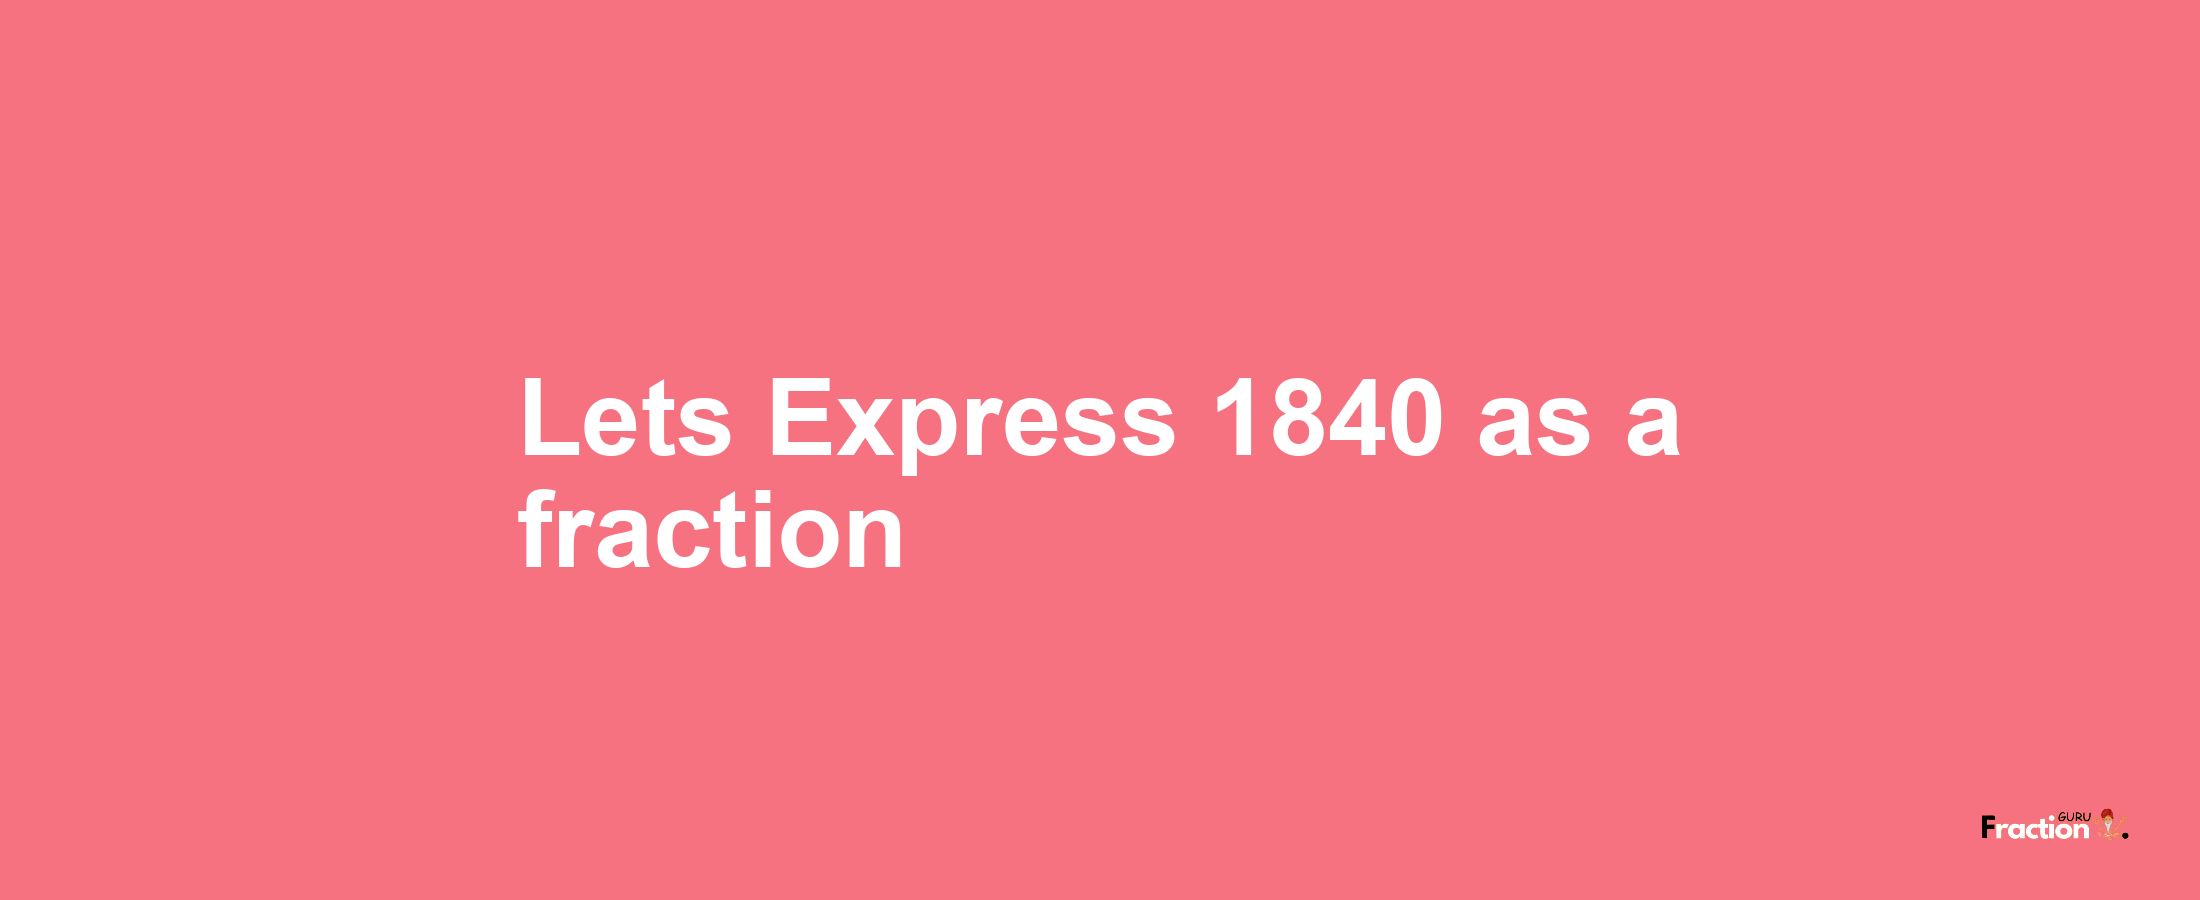 Lets Express 1840 as afraction